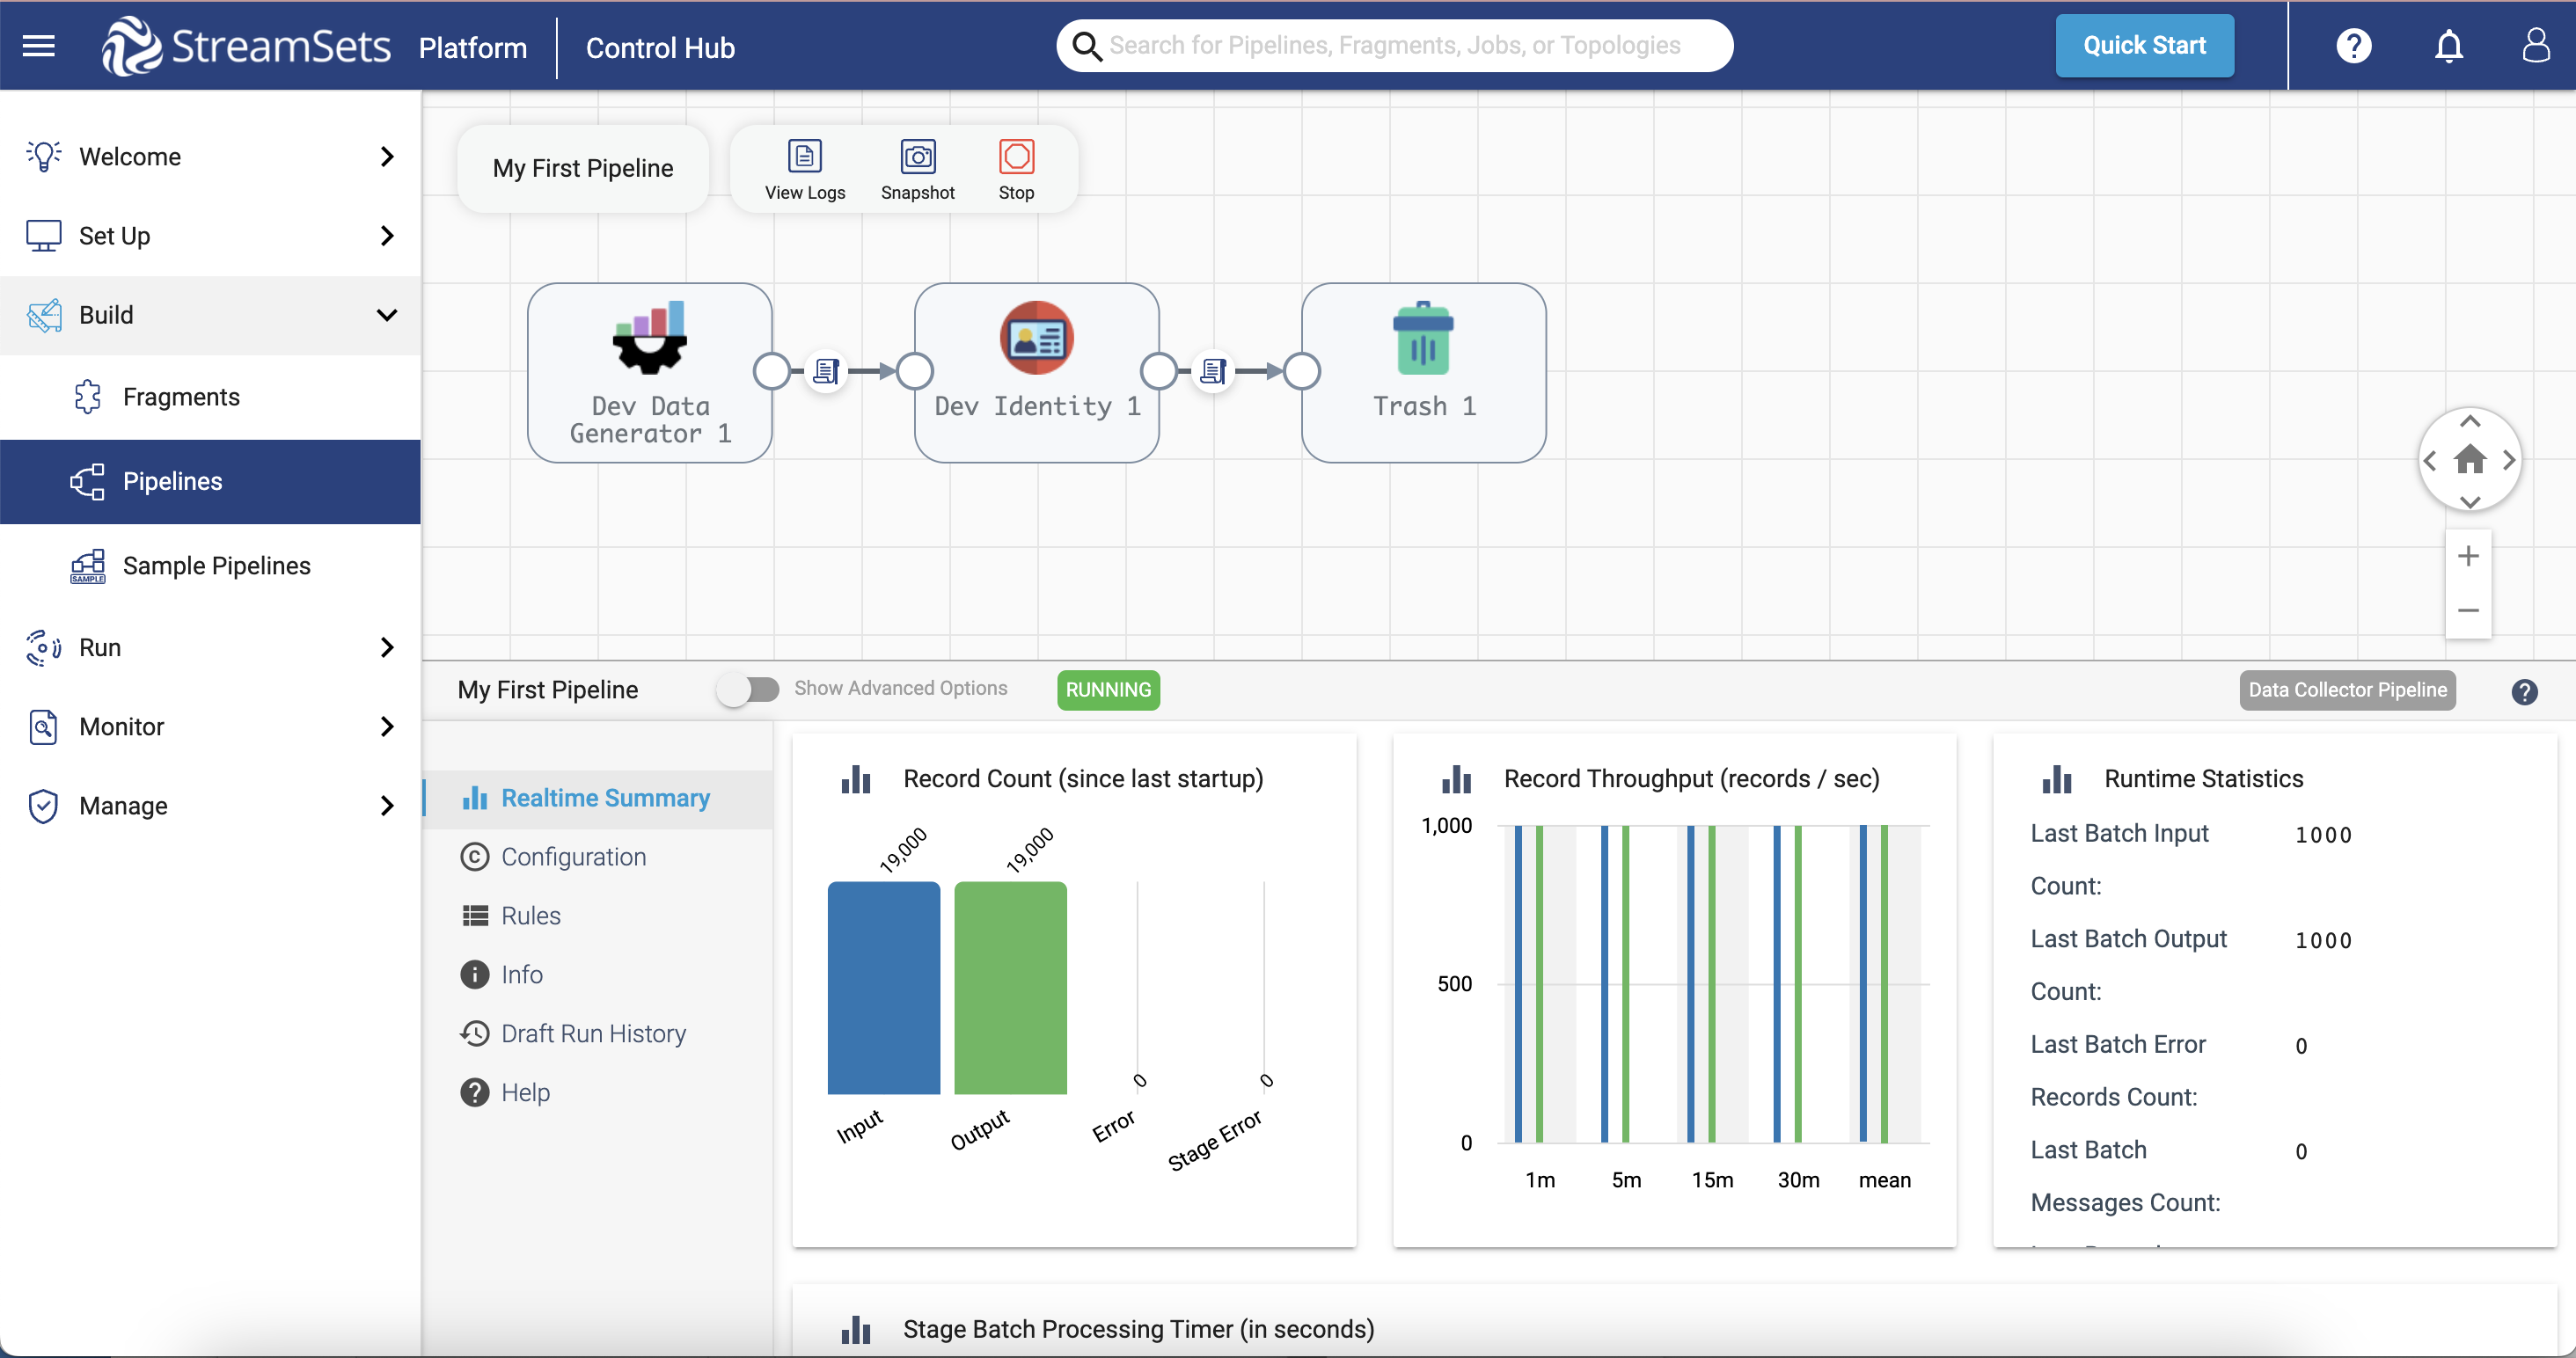 StreamSets Platform Software - Use the wysiwyg editor to simply create, preview, and configure smart data pipelines. Once you've successfully previewed your pipeline, create a job to schedule or run your pipeline.